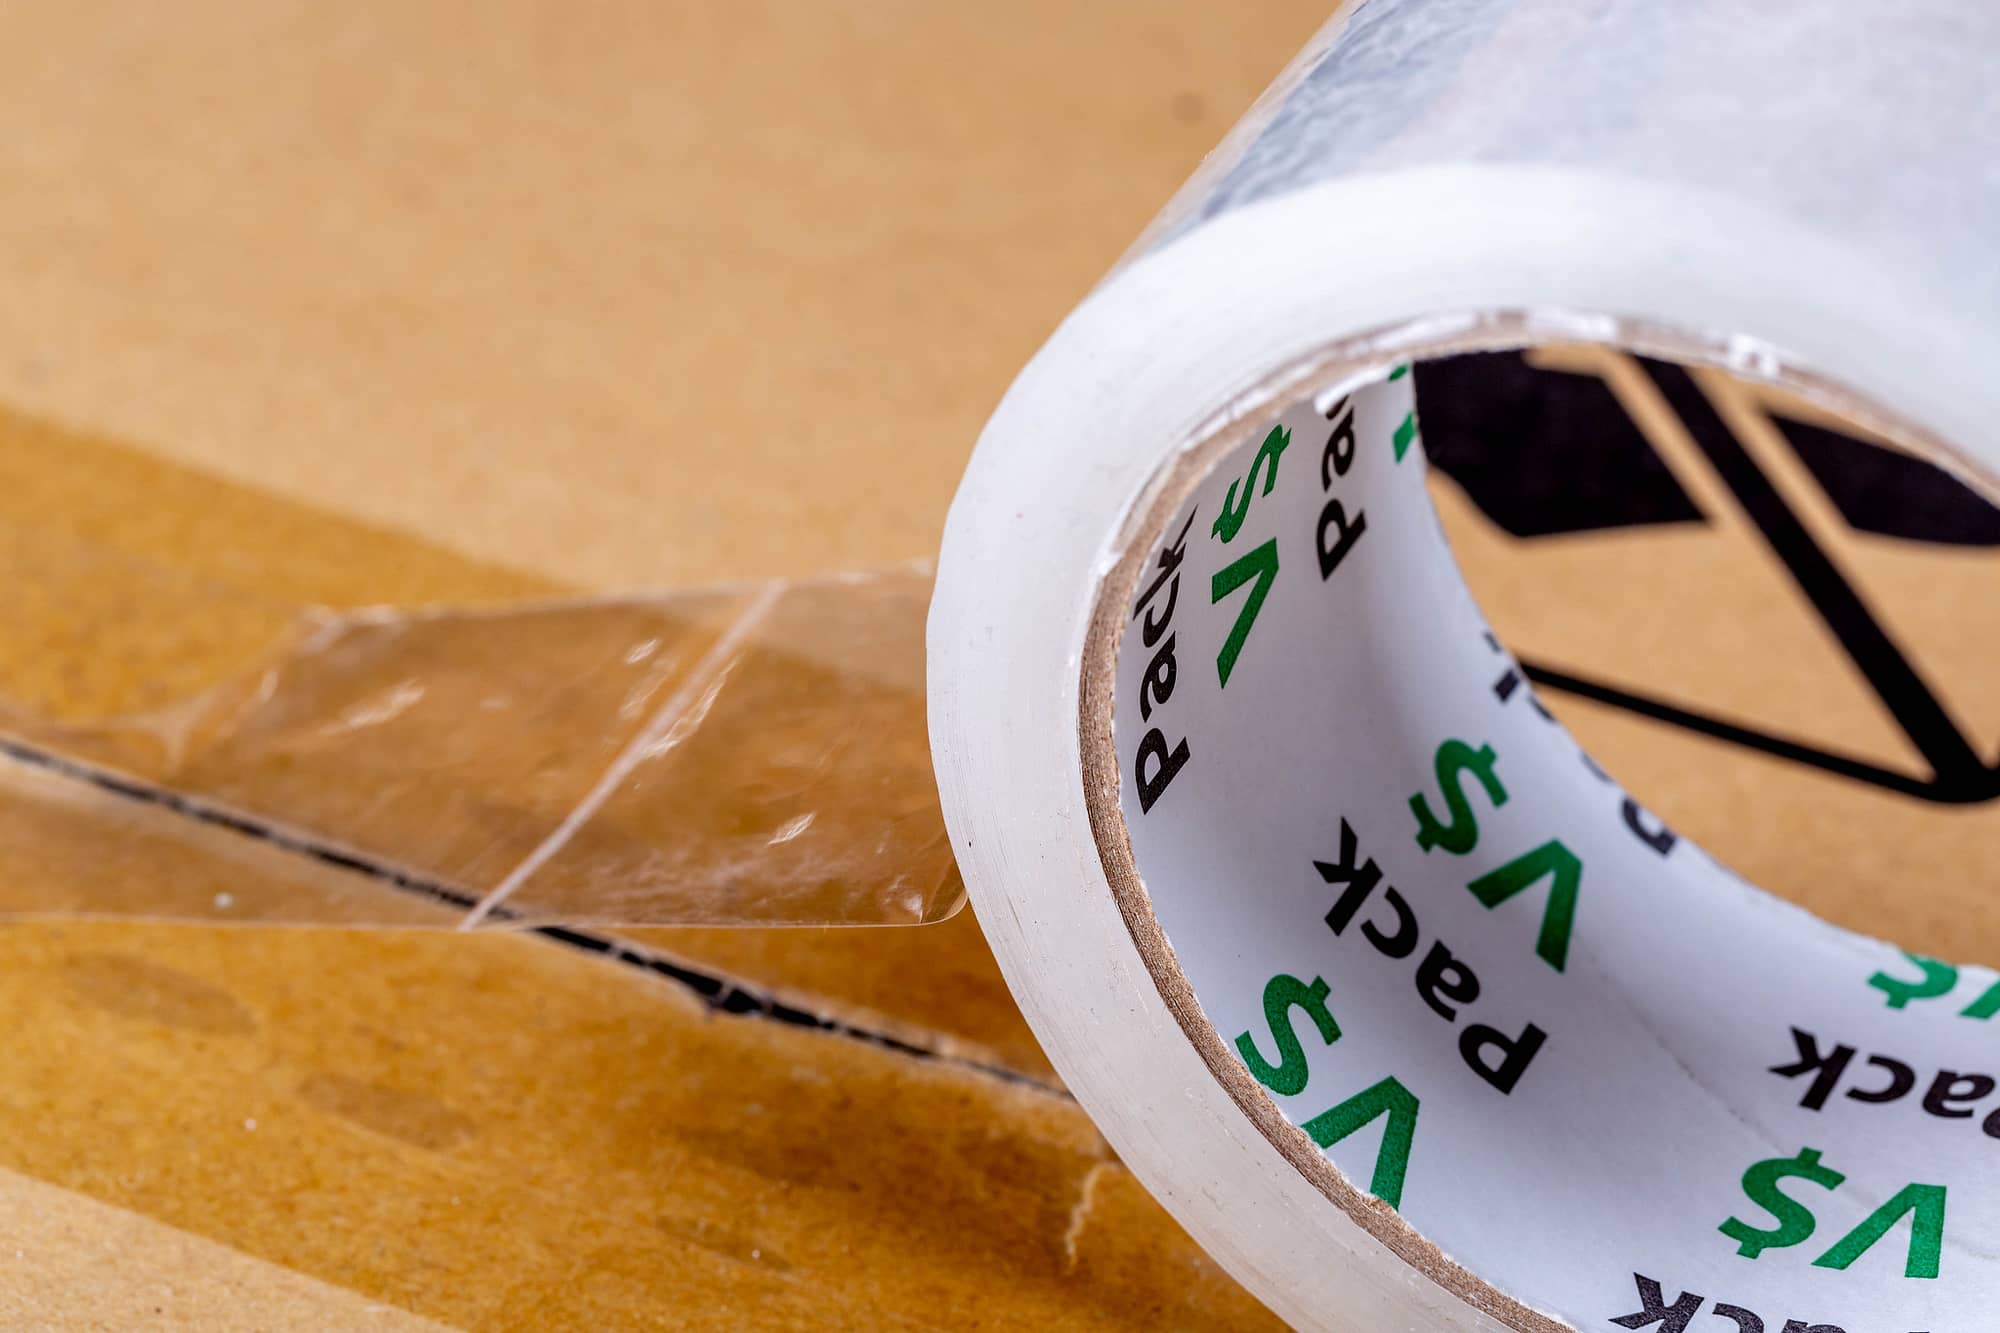 Where to get free packing tape, USPS Priority Mail tape, USPS Priority Mail Express tape, etc